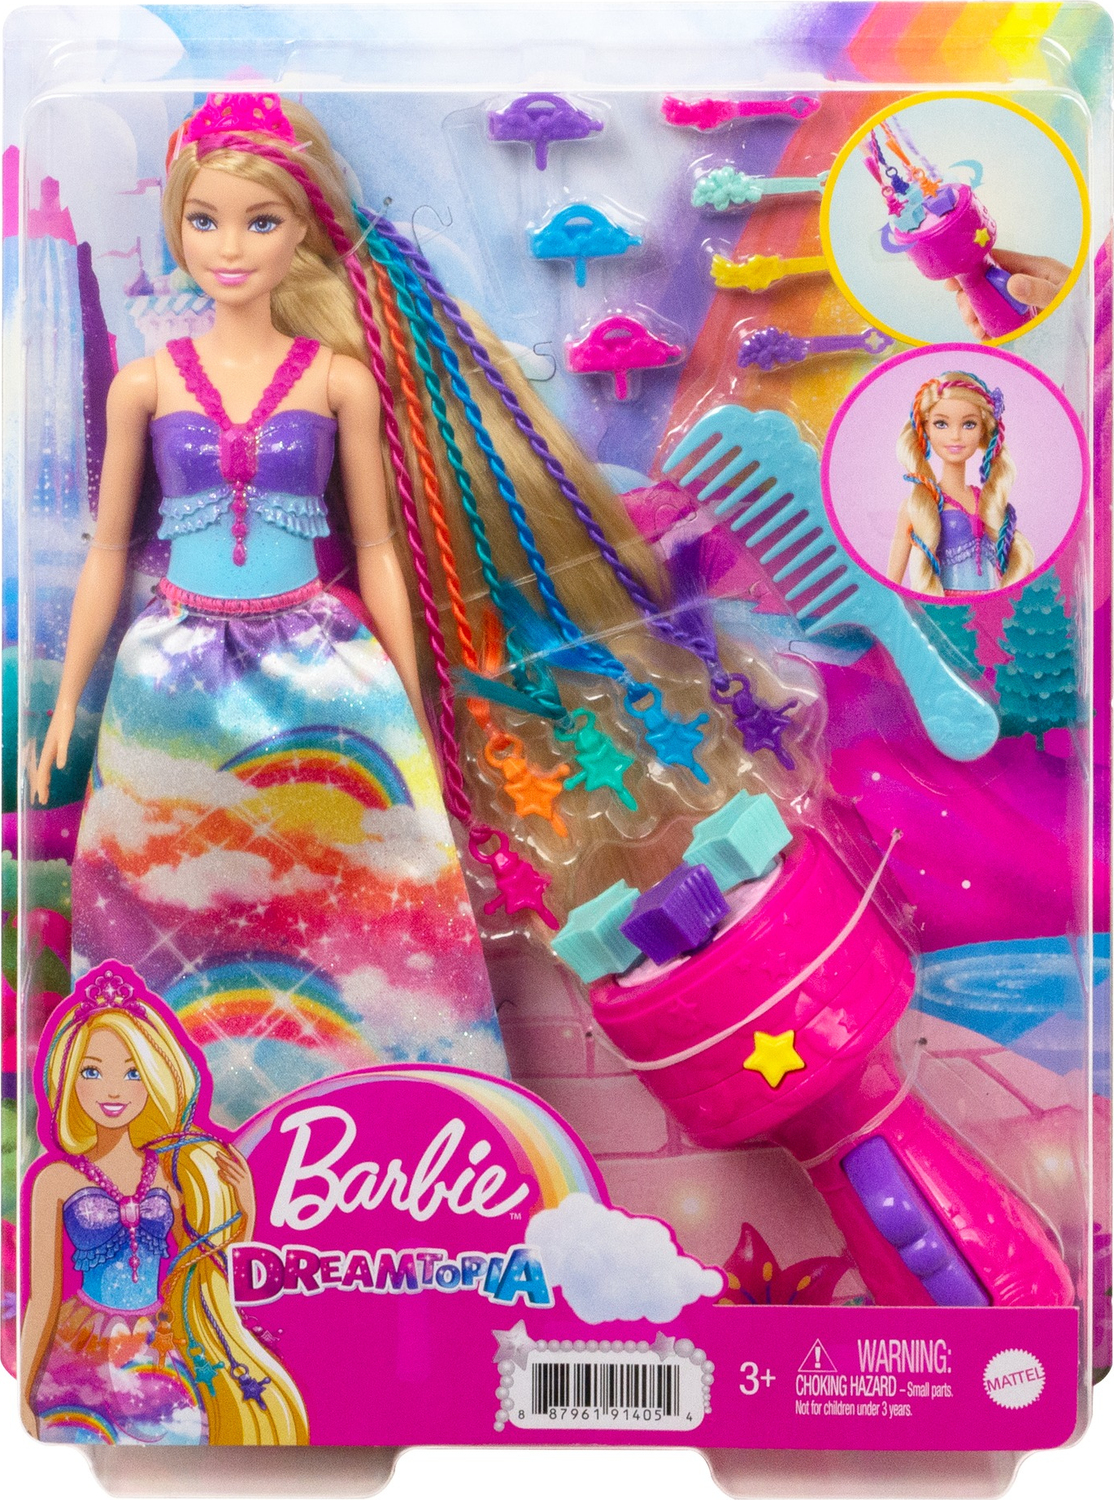 Barbie Dreamtopia Princess Doll, 12-inch, Brunette with Blue